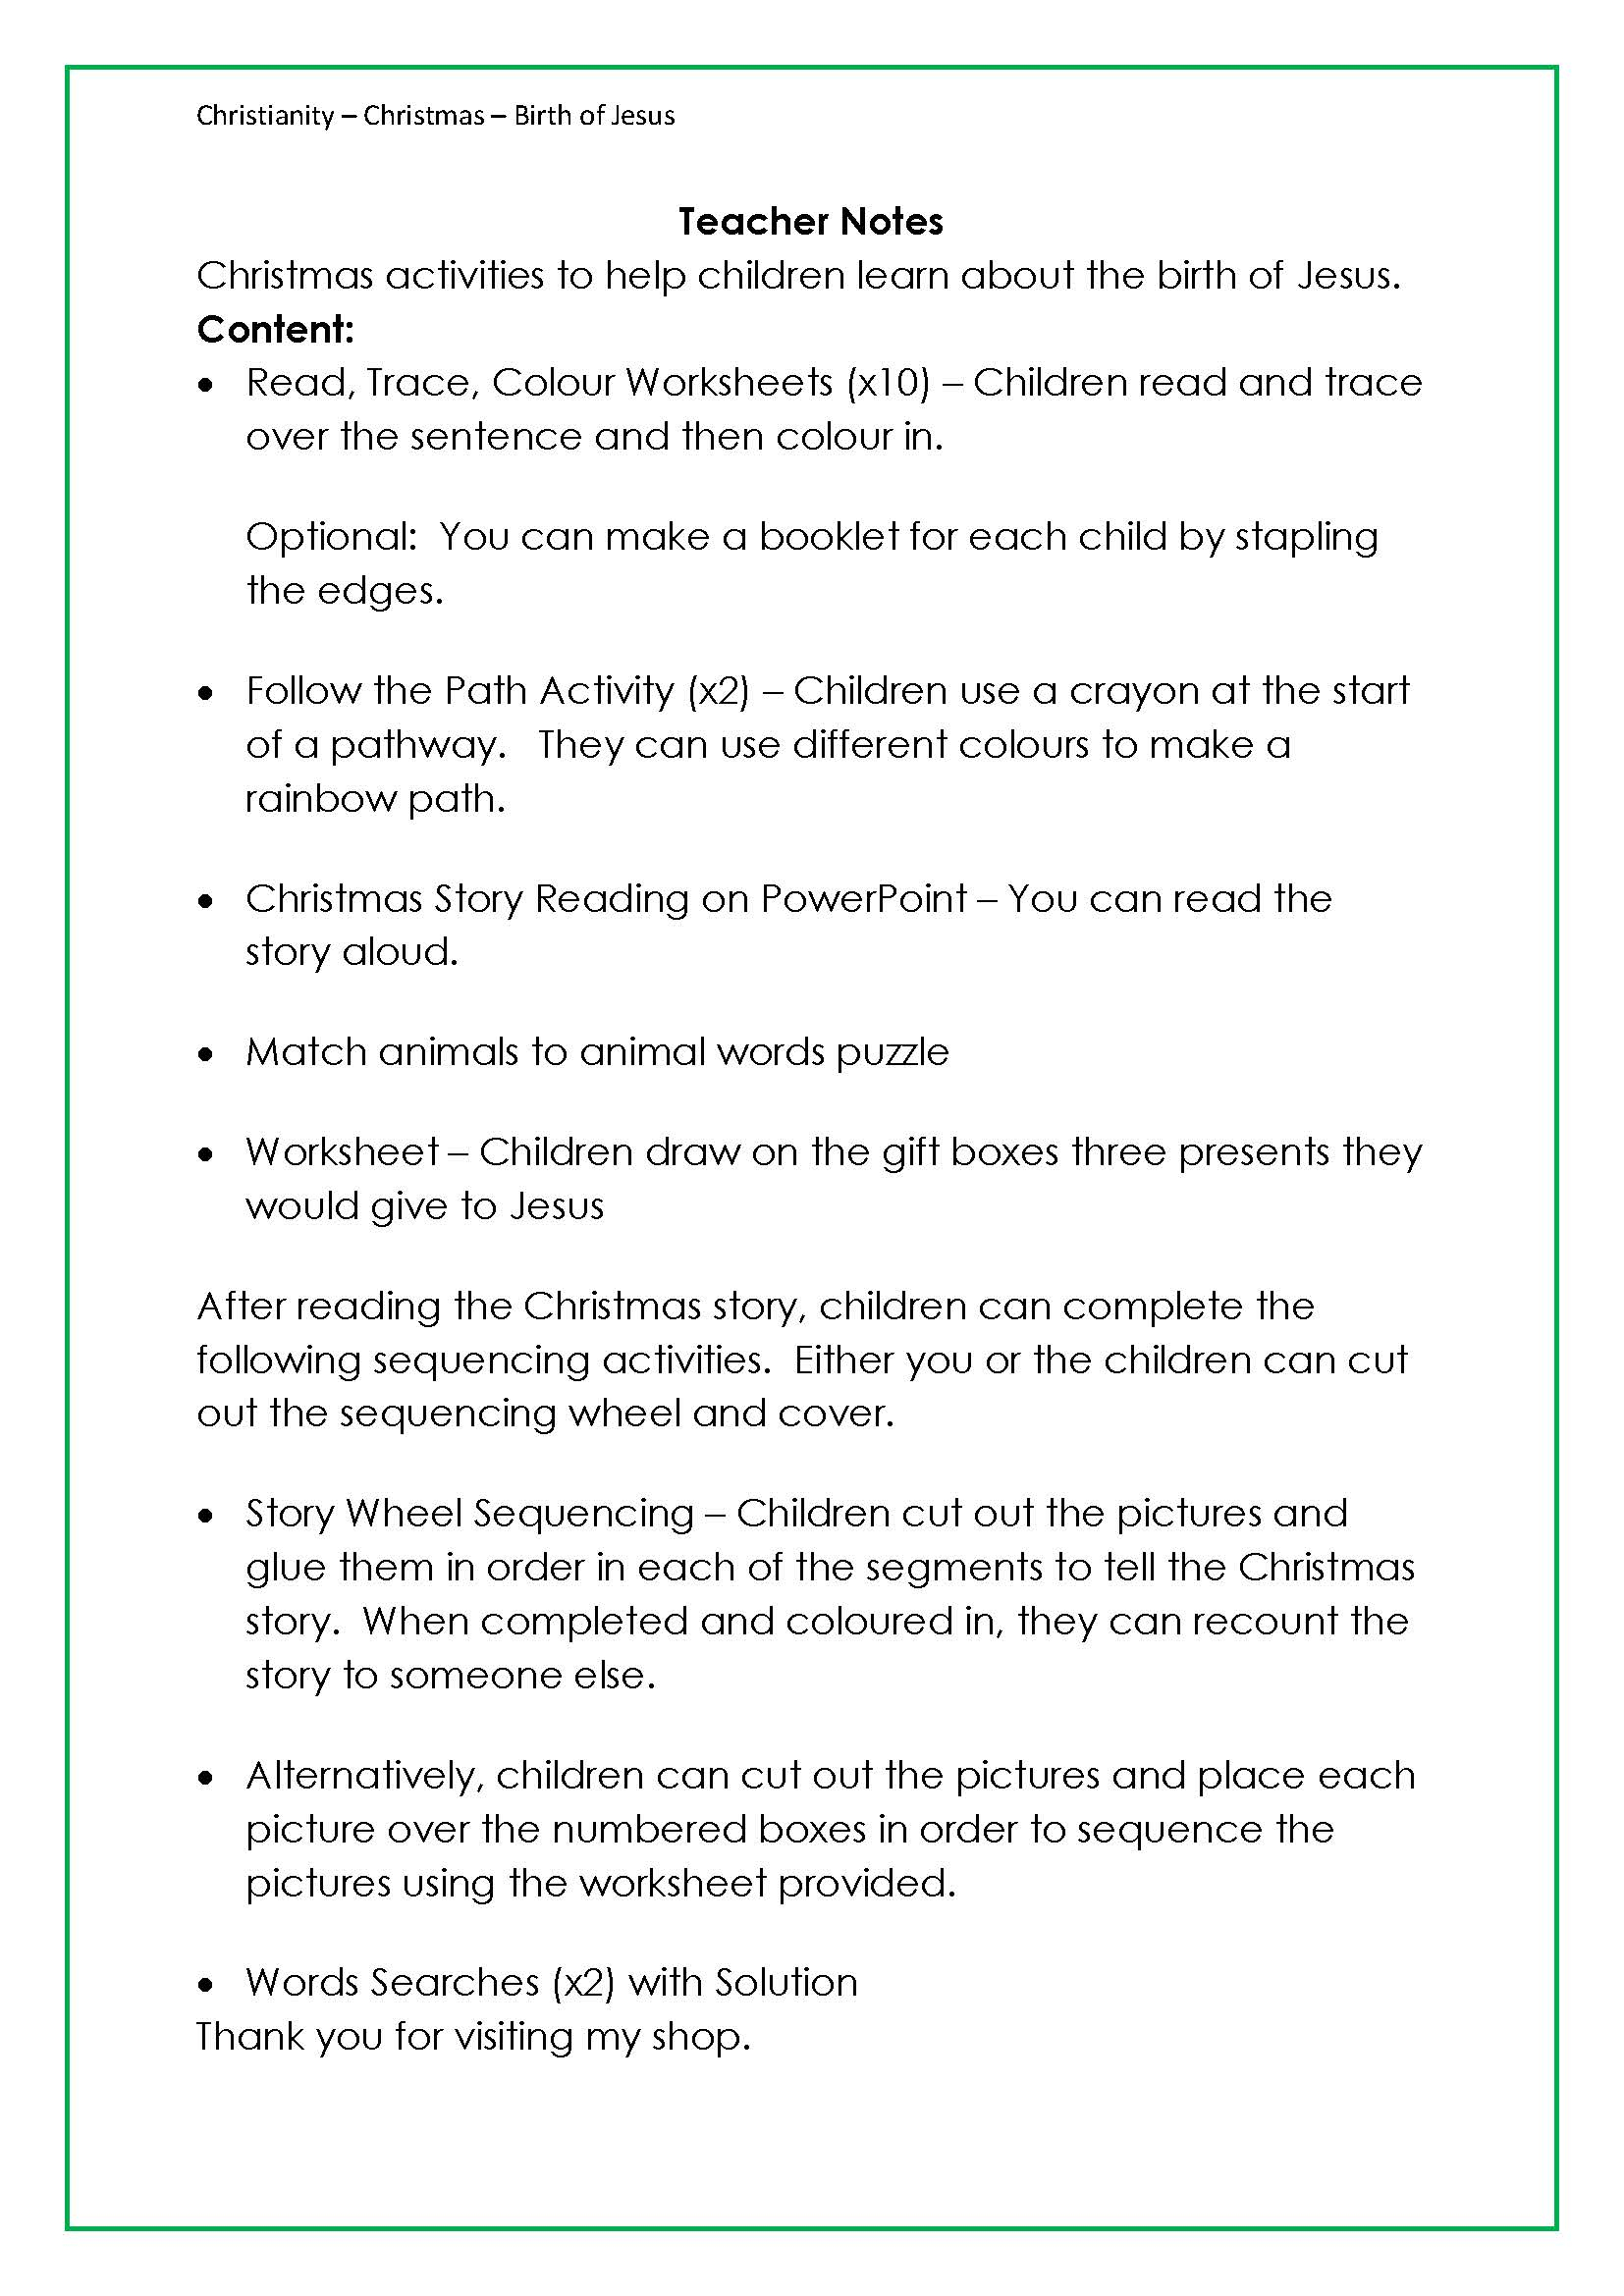 Christmas Story Activities Worksheets Story Wheel Sequencing Word Searches